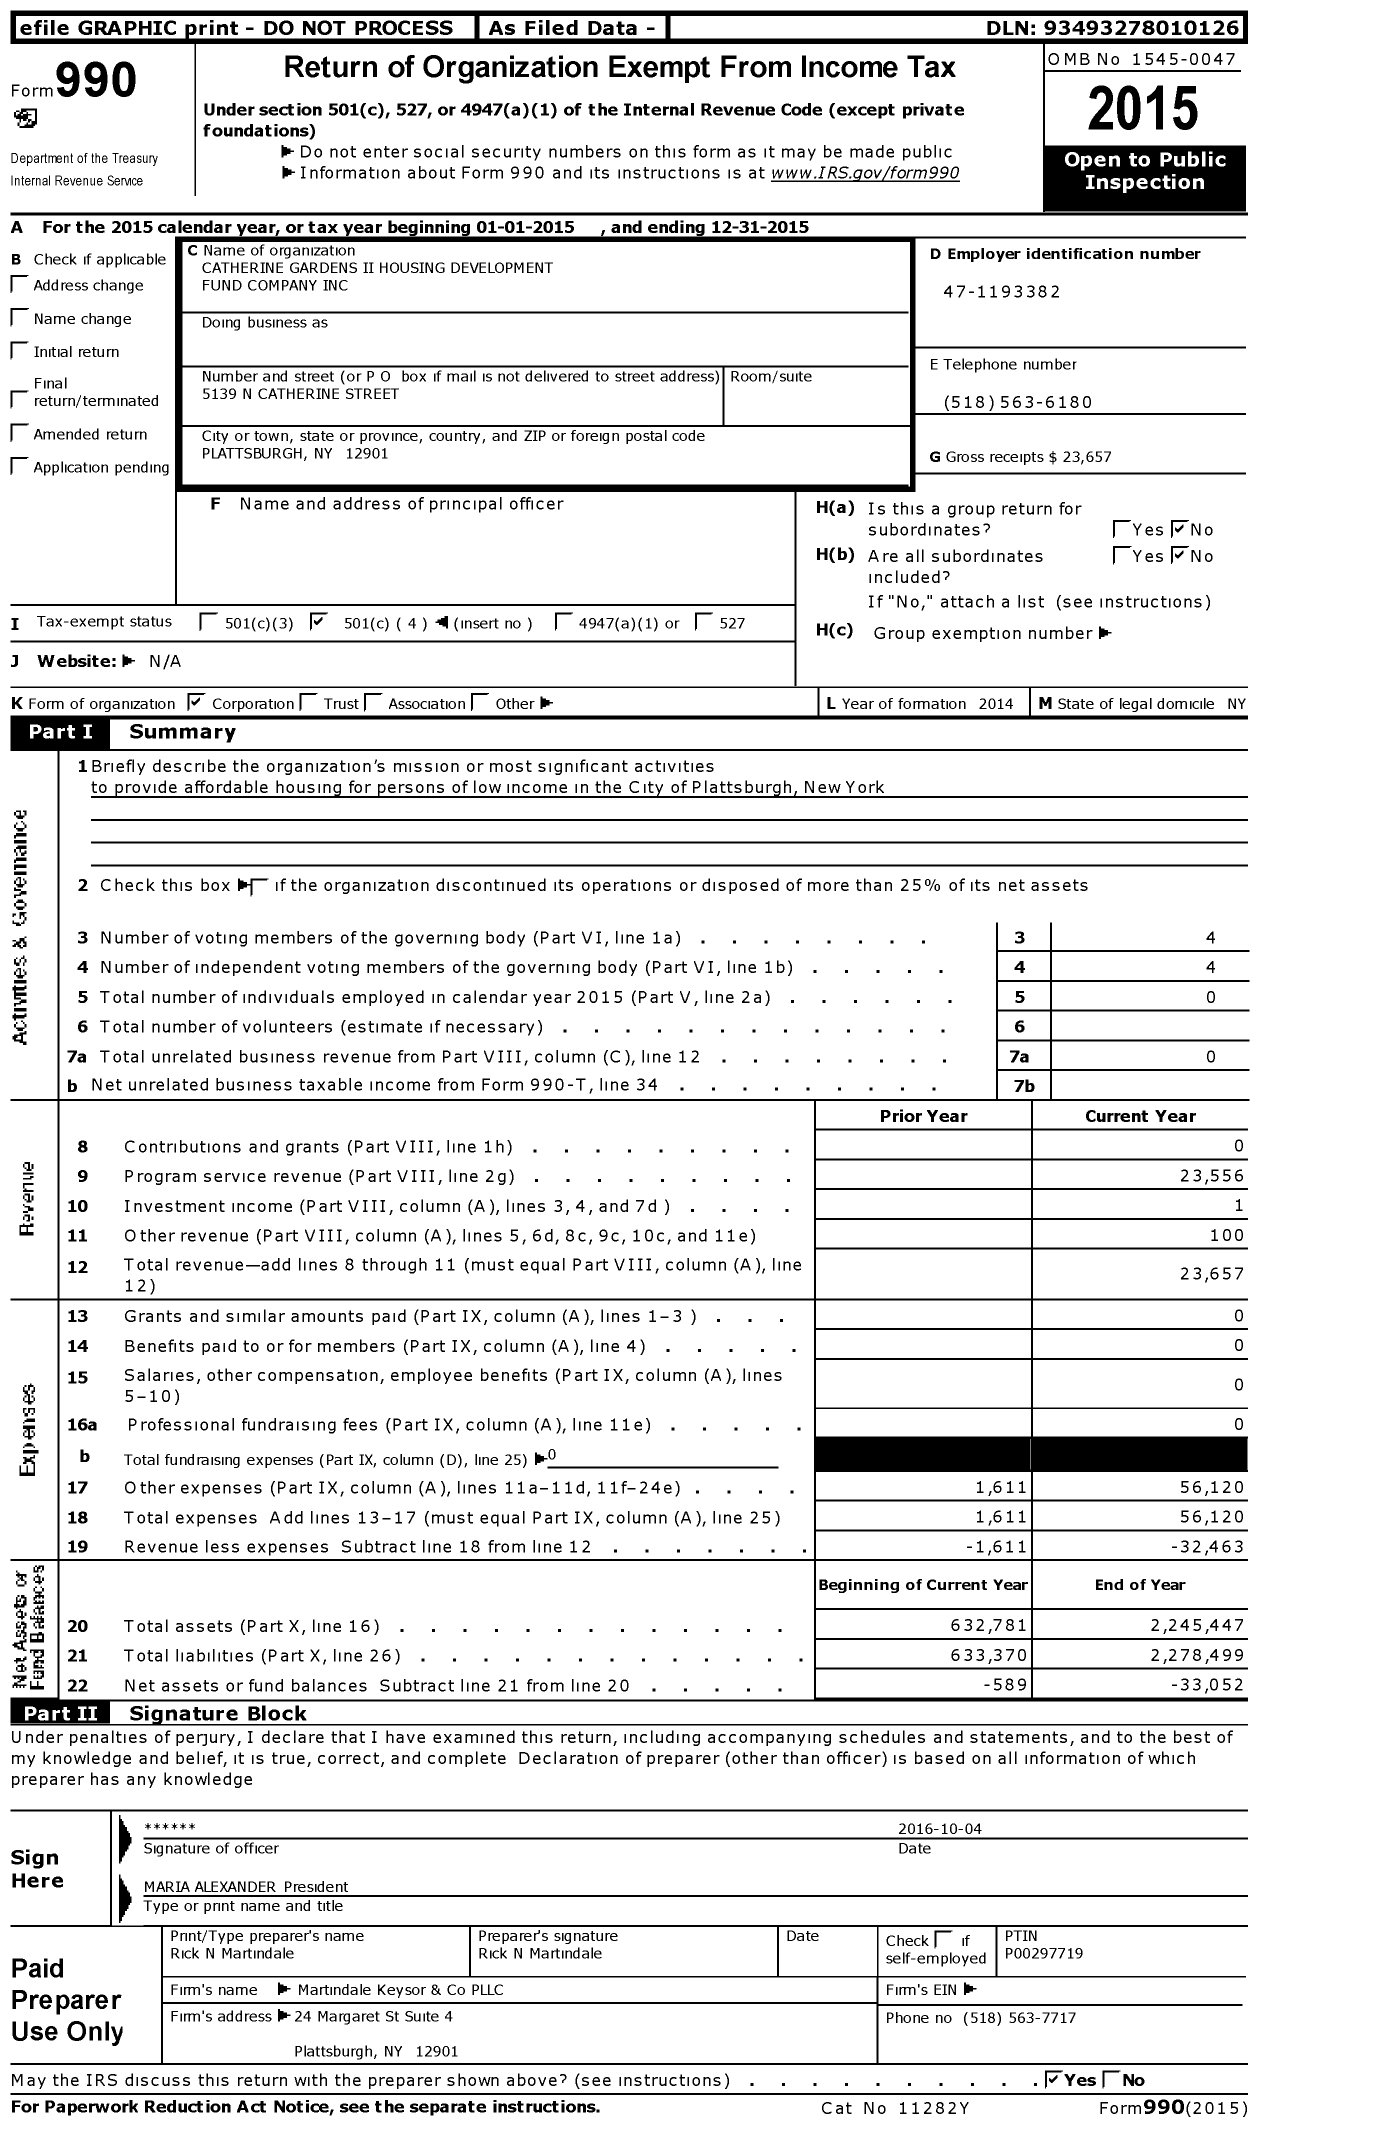 Image of first page of 2015 Form 990O for Catherine Gardens Ii Housing Development Fund Company